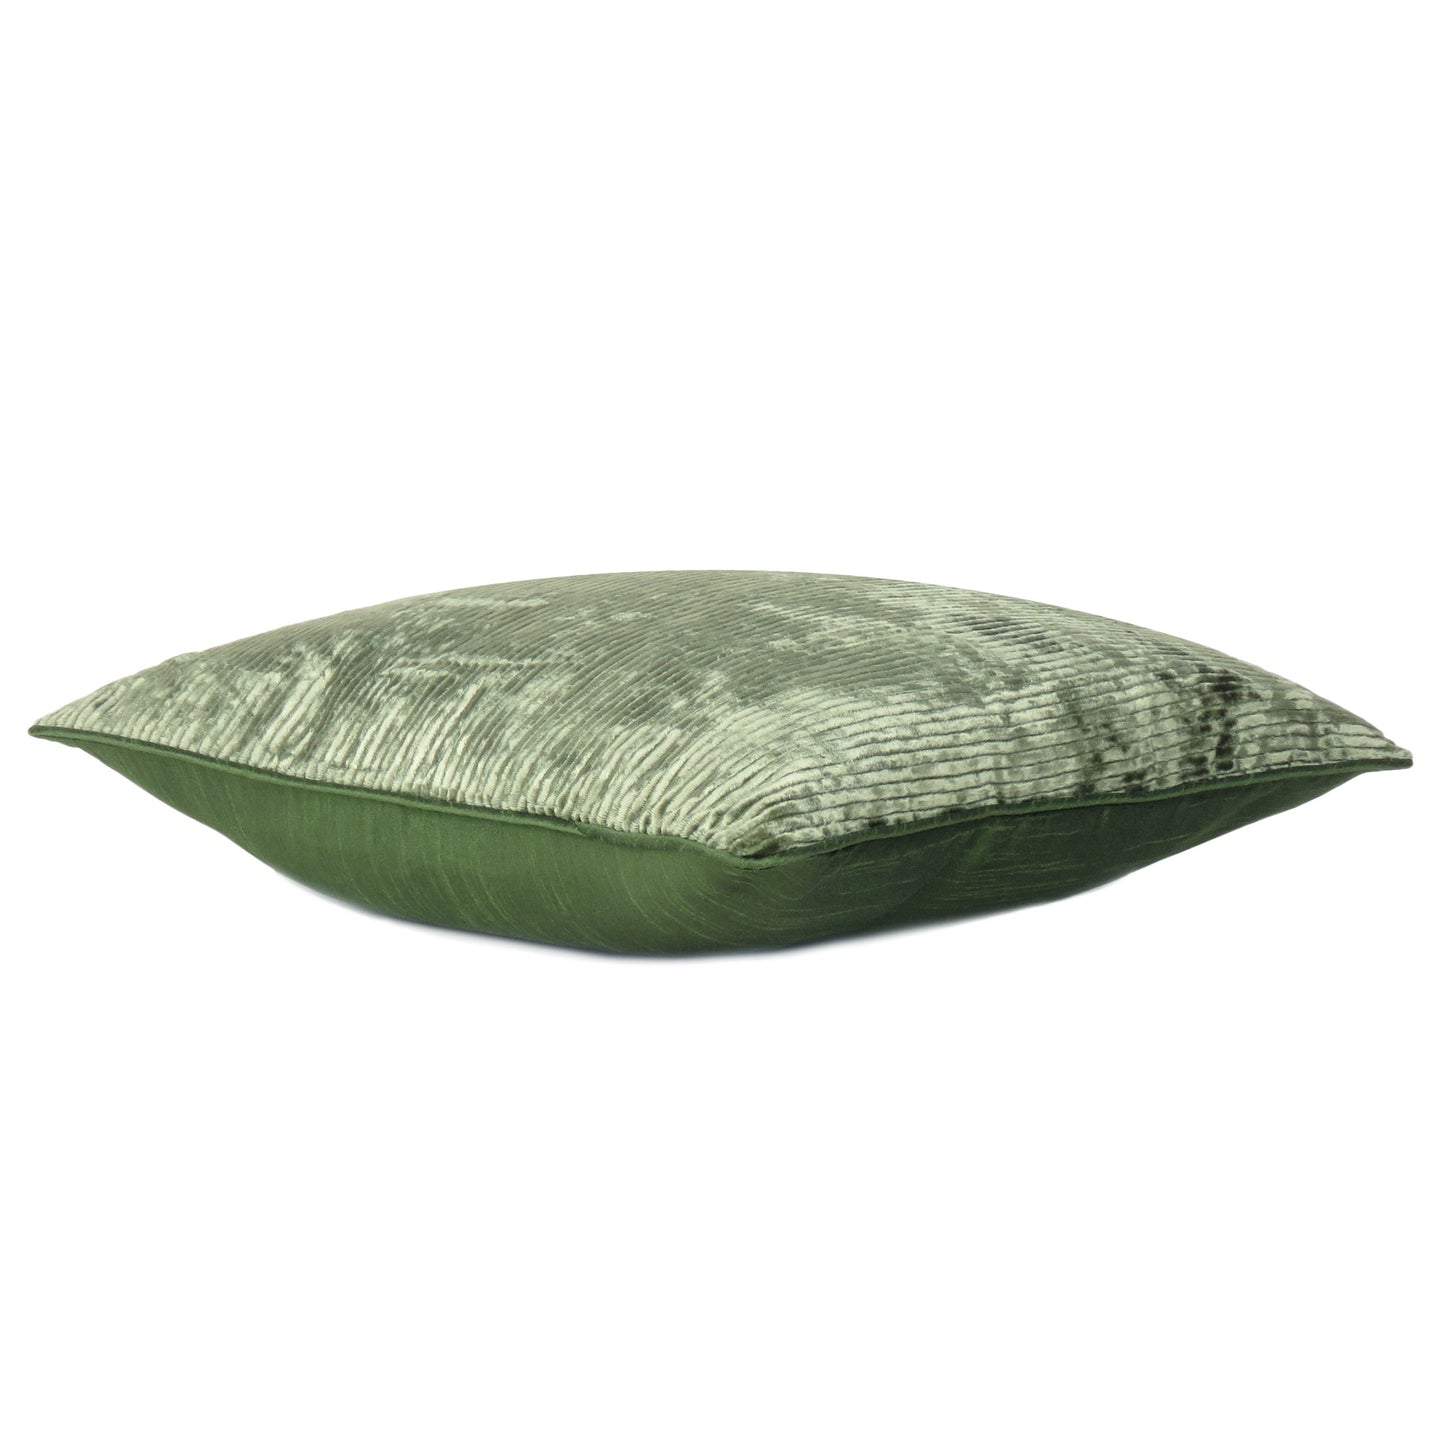 Solid Corduroy Cushion Cover in Set of 2 - Green